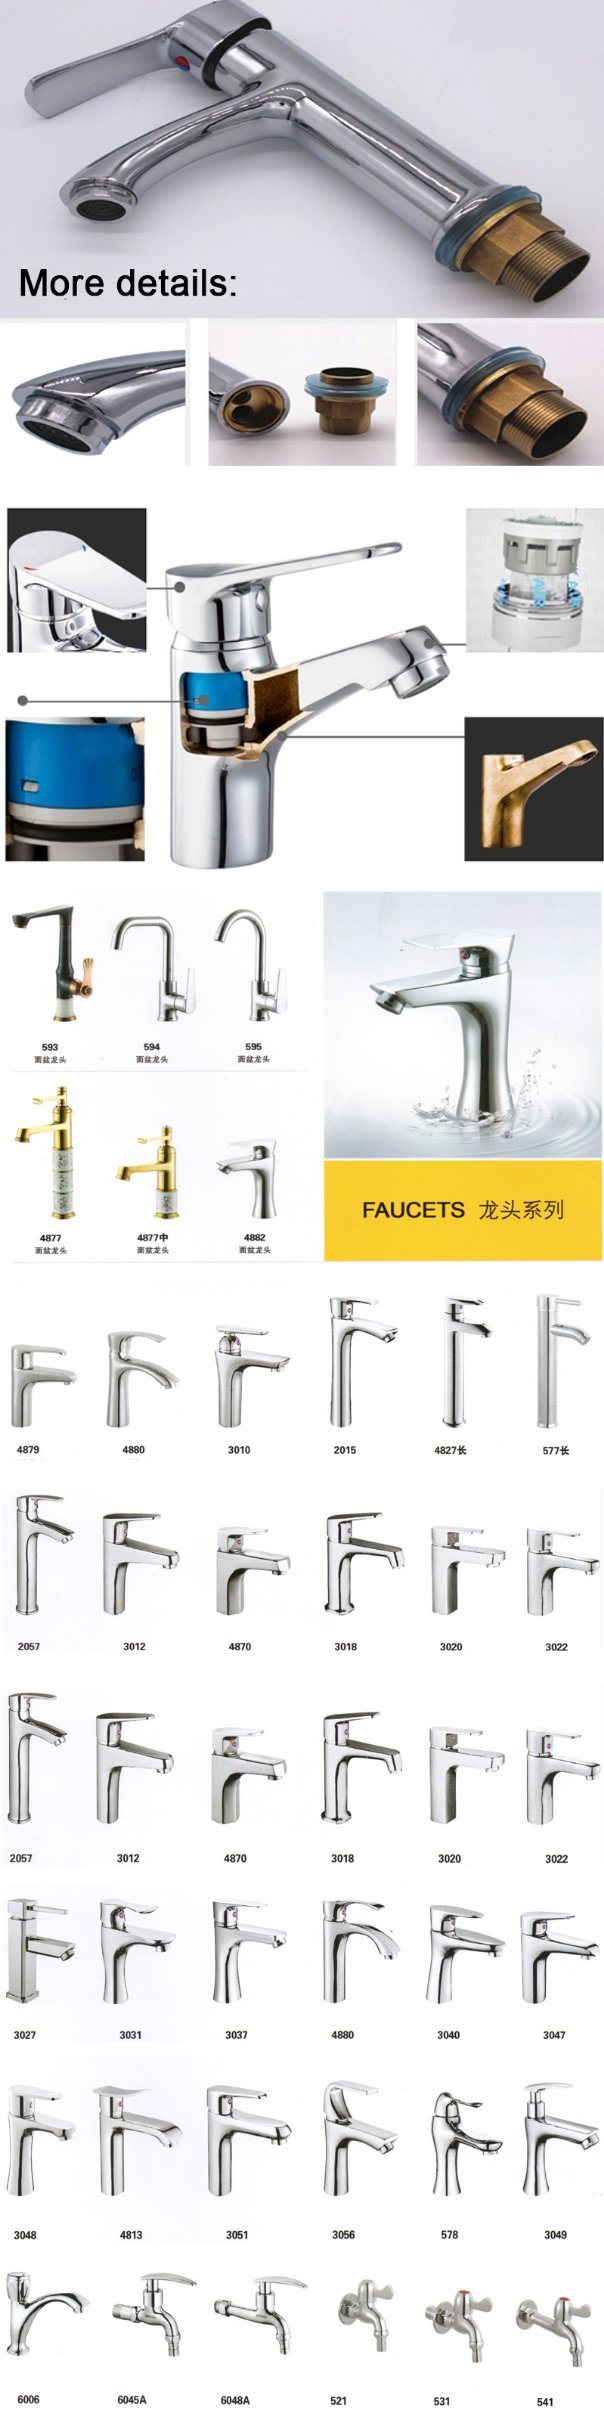 Quality Chrome Plated Sanitary Ware Basin Shower Faucet Bathtub Faucet